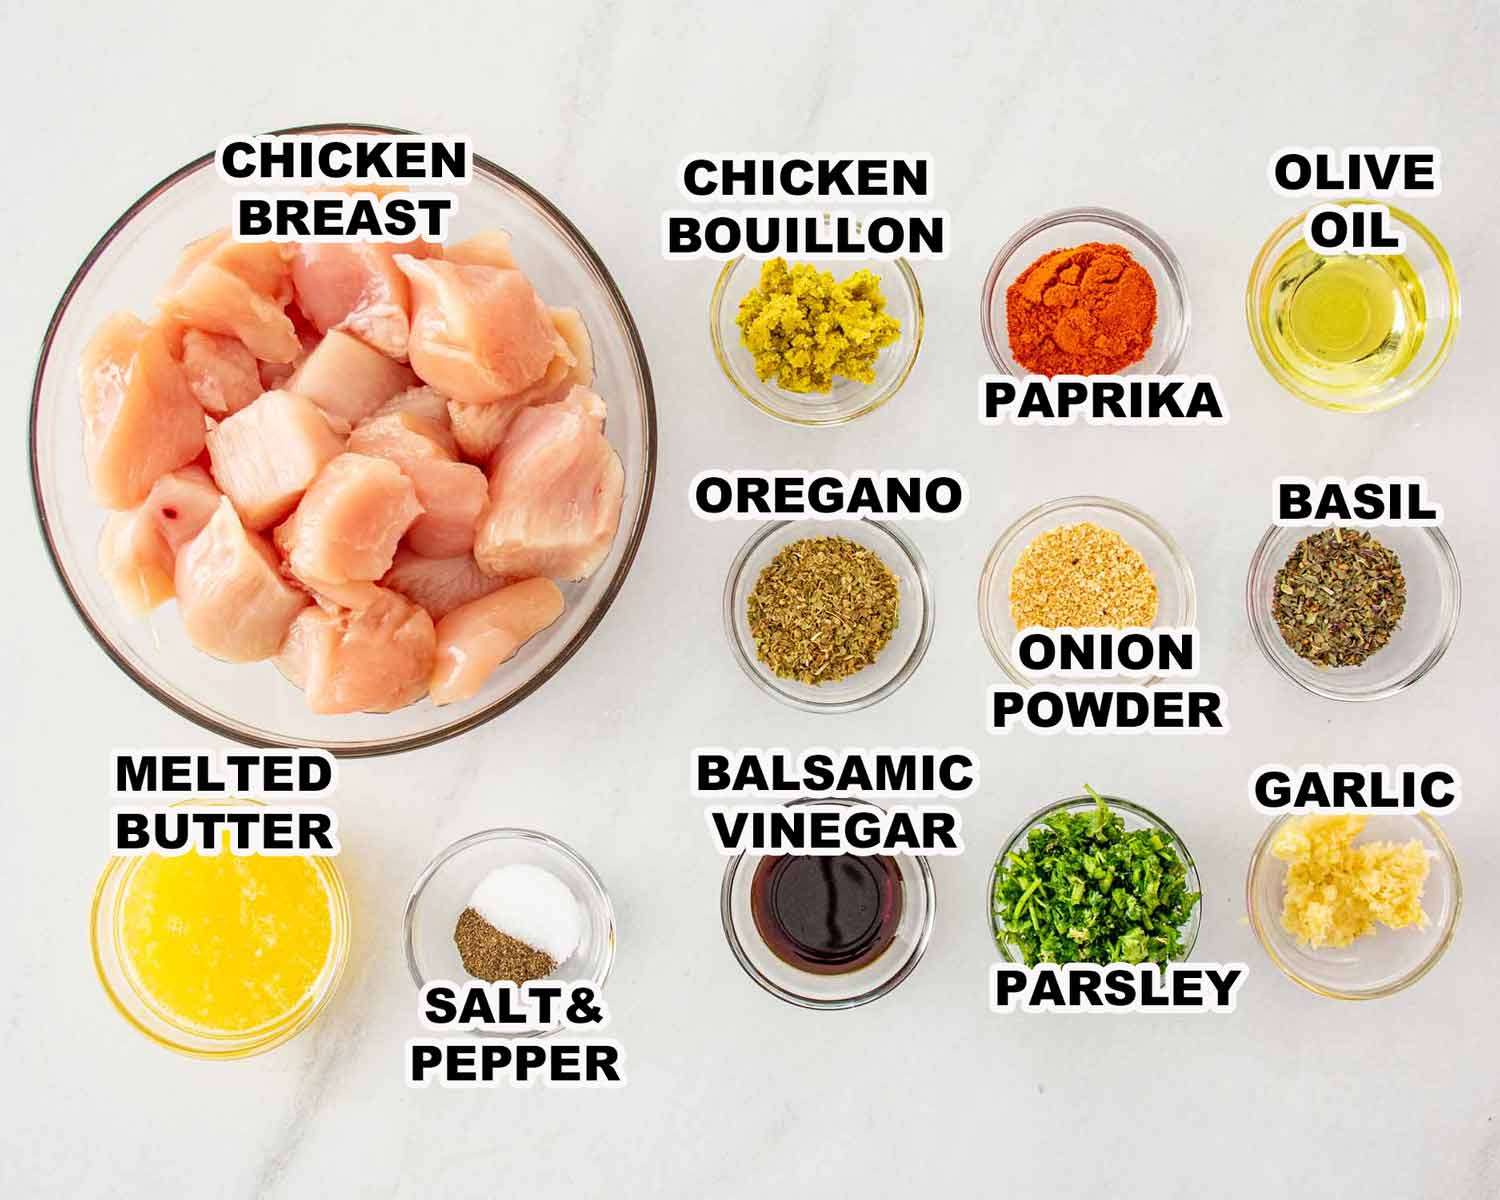 ingredients needed to make oven baked chicken bites.